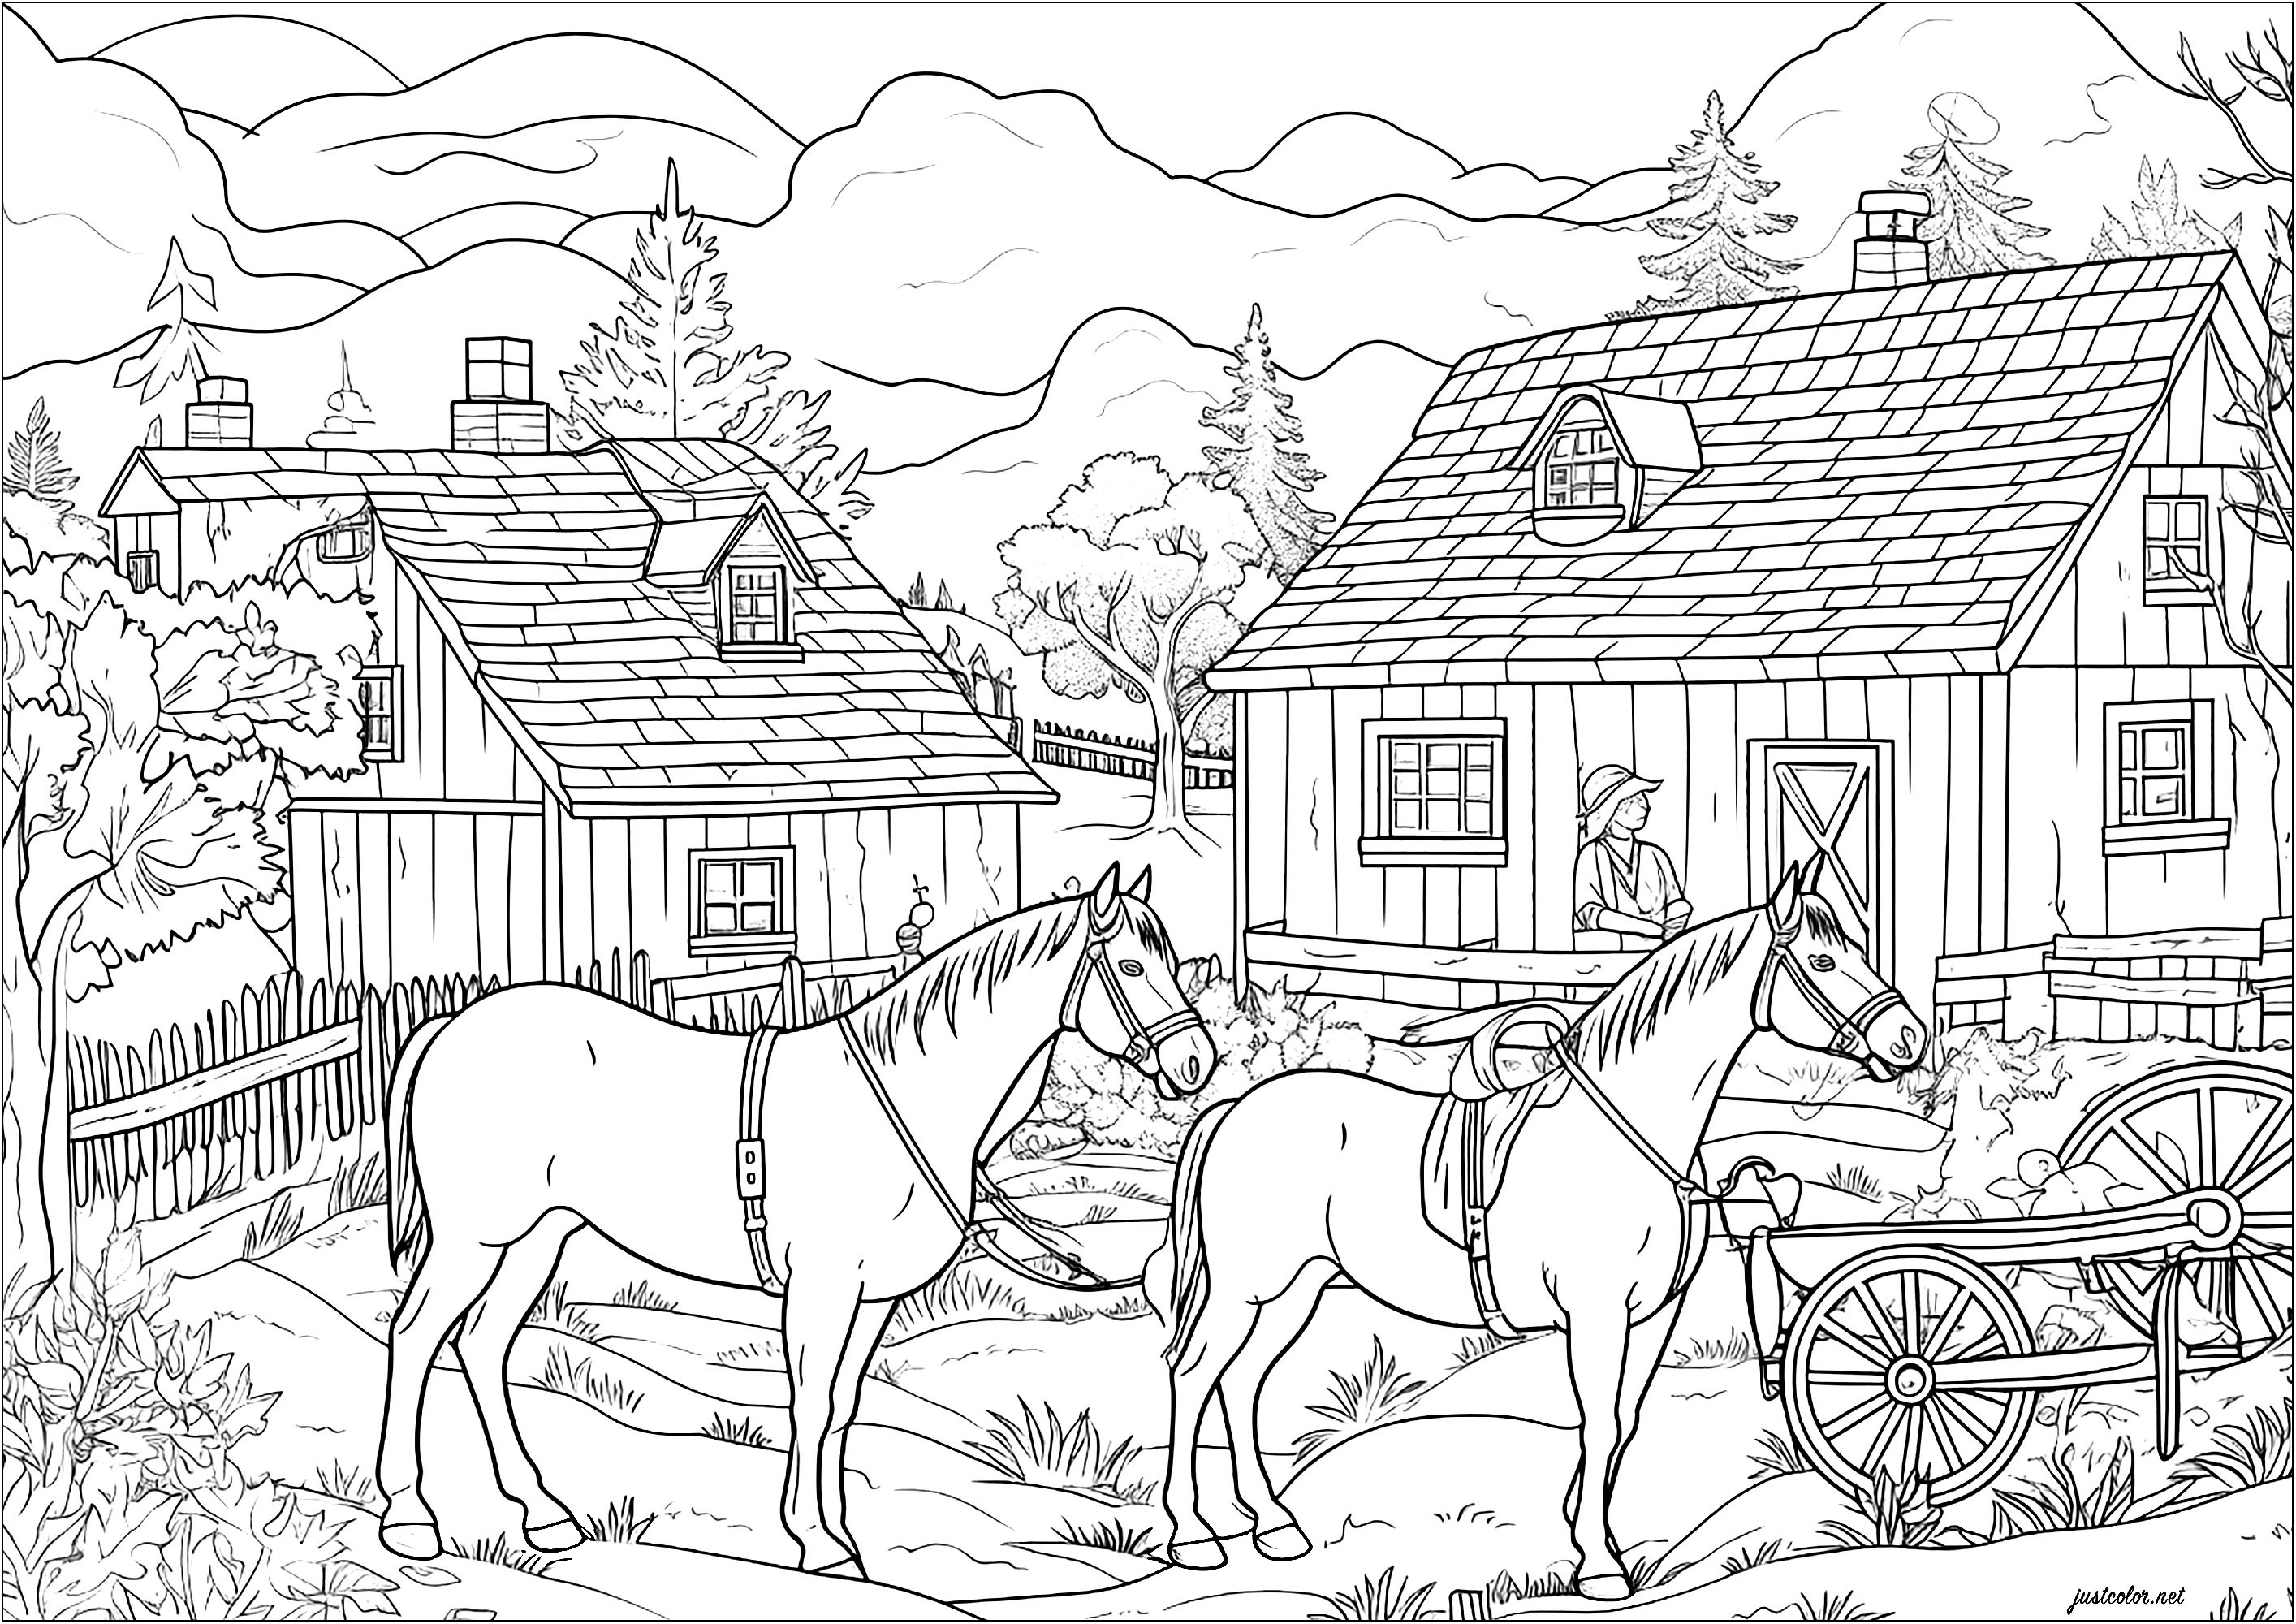 Two horses on a farm. A coloring page full of details